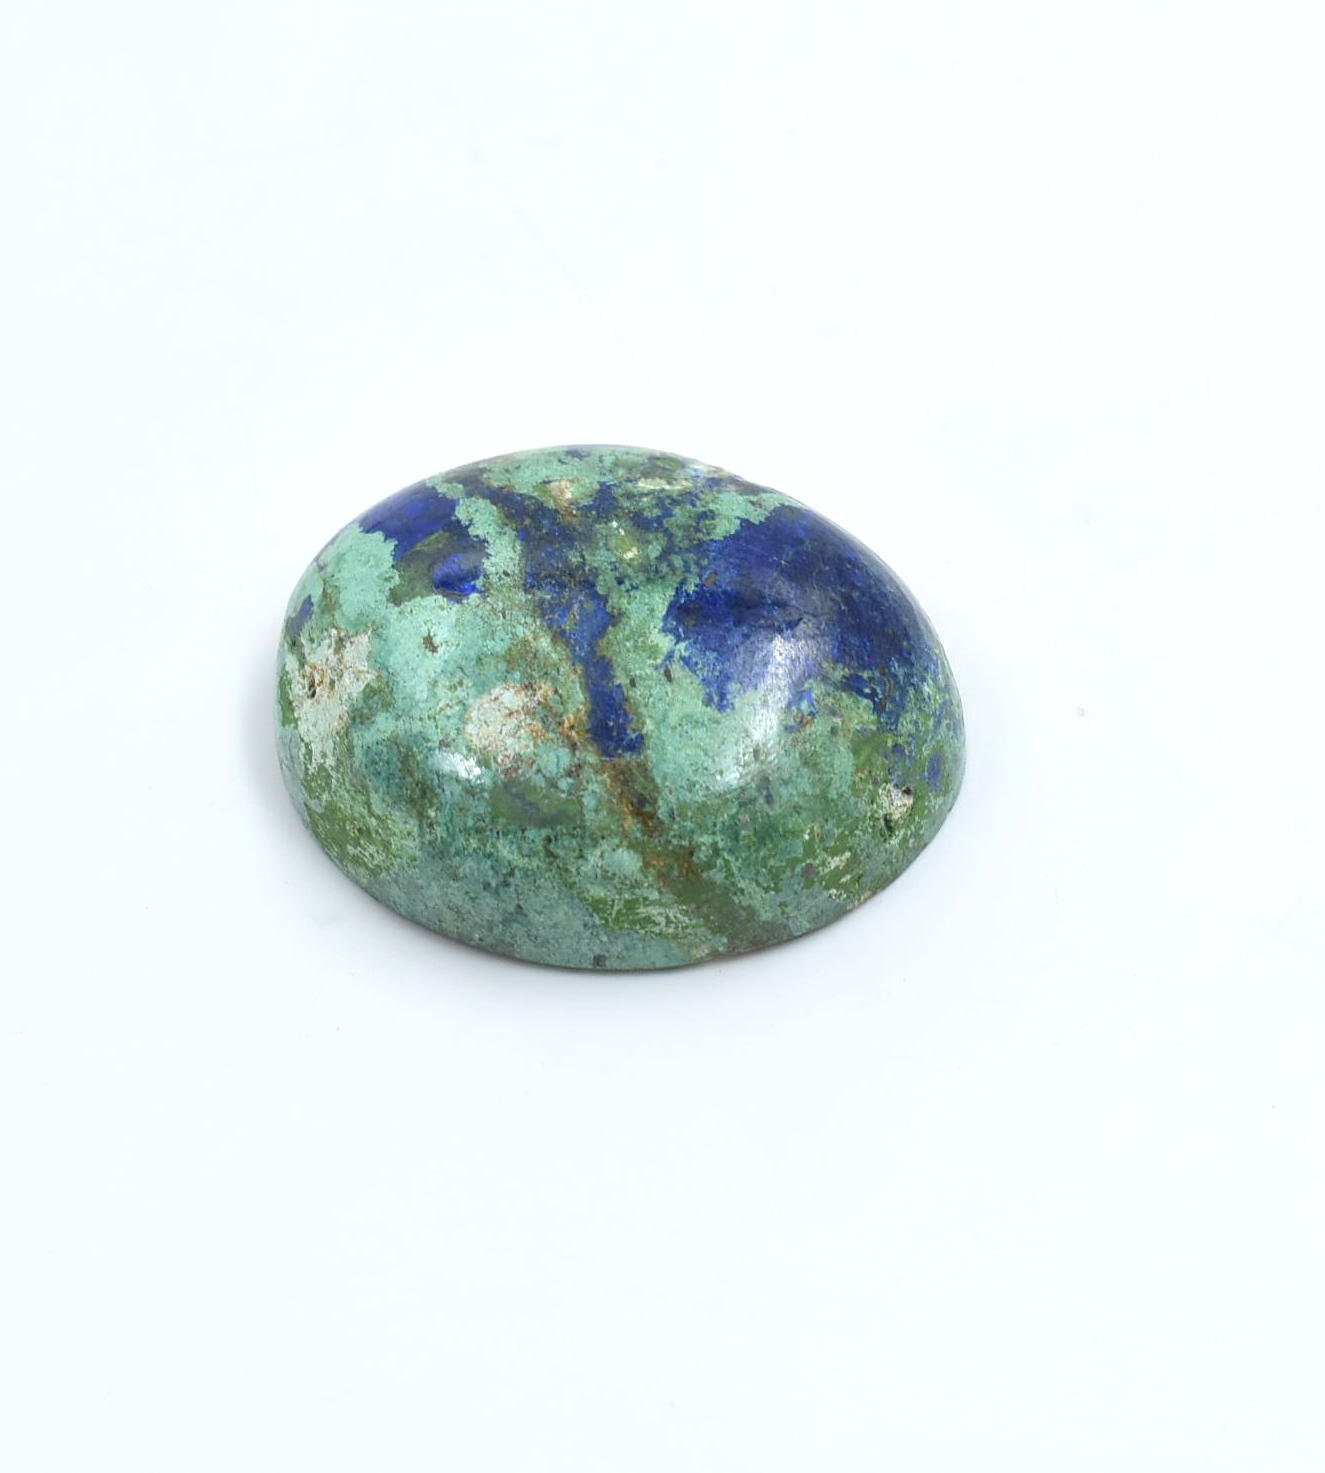 100% Natural Azurite Malachite Cabochon Good quality stone Beautiful Art Making for jewellery Ring 44.50 CARAT 26X22 MM | Save 33% - Rajasthan Living 13